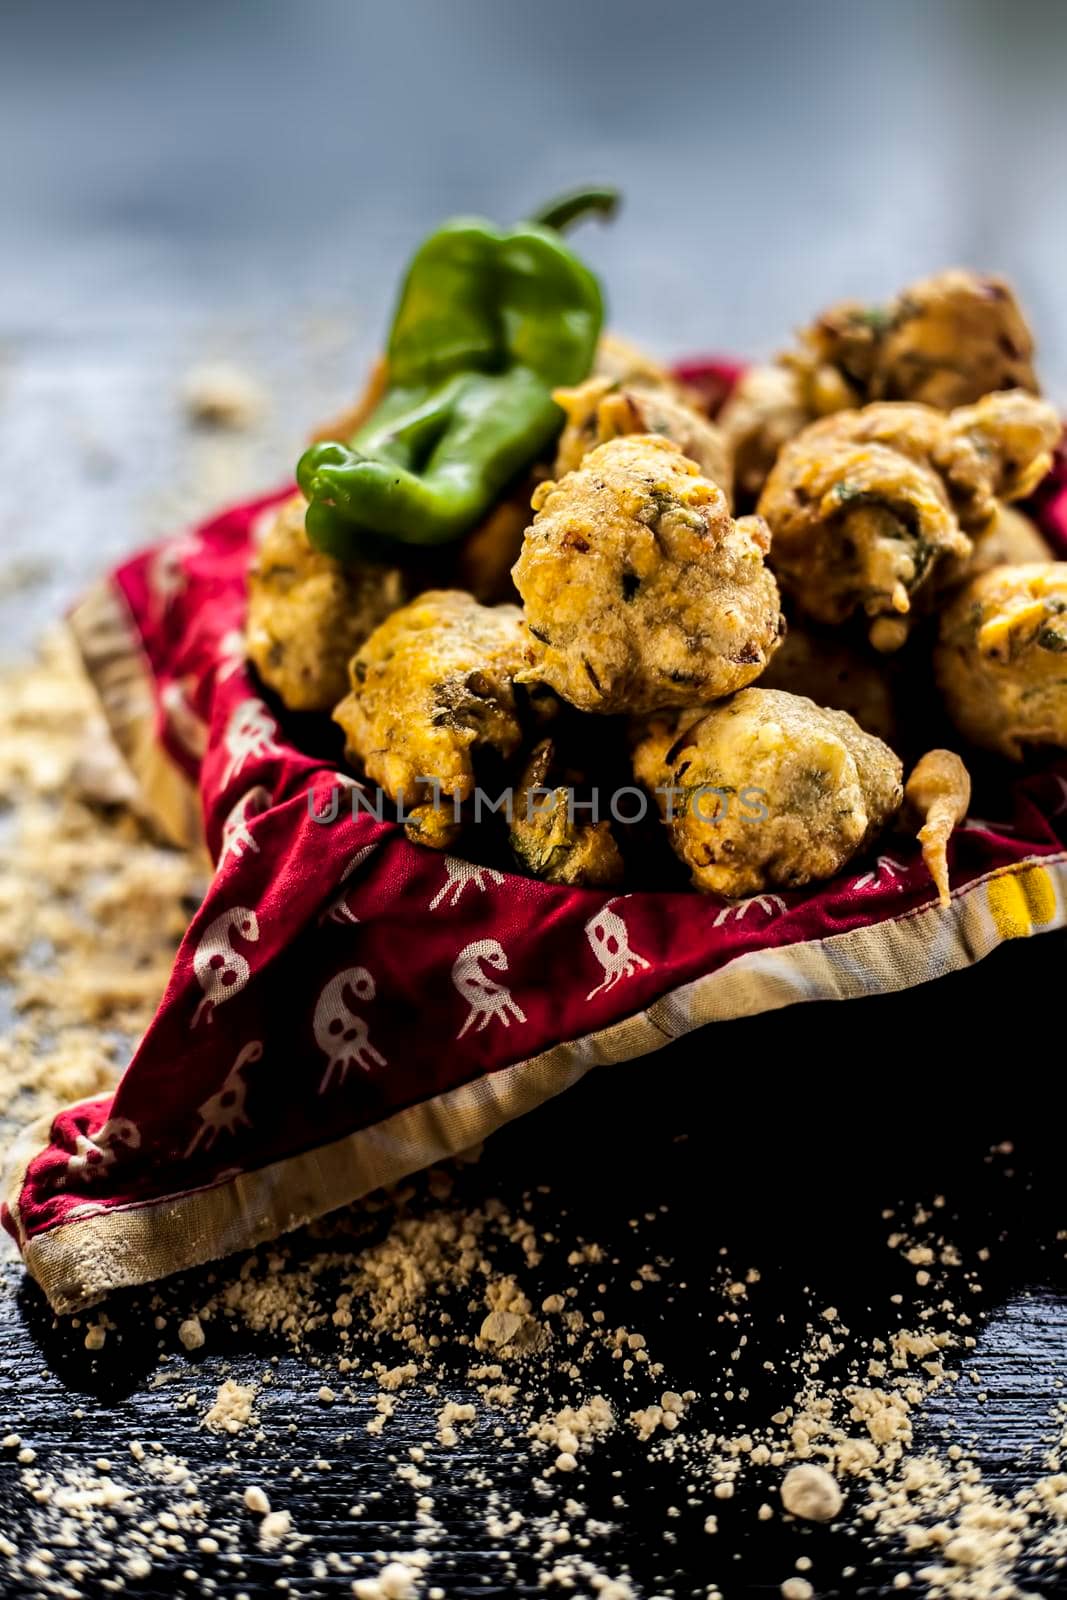 Close up shot of freshly fried methi pakora in a container on a black surface along with some spices and a chickpea flour spread on the surface. Methi pakora in a serving dish on the black surface.